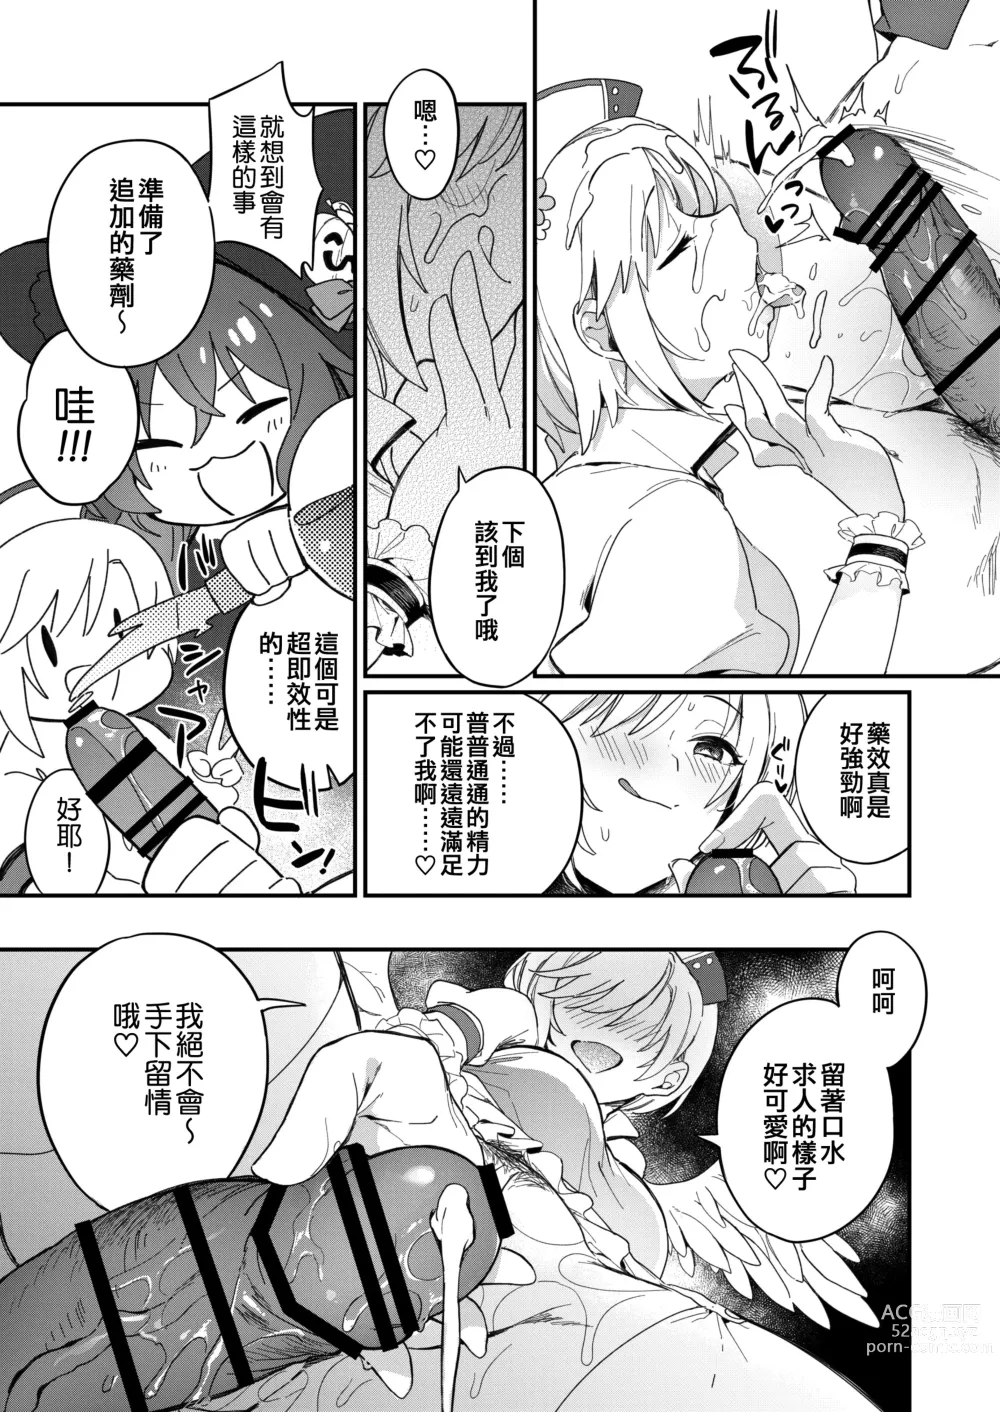 Page 19 of doujinshi Harem Halloween Party